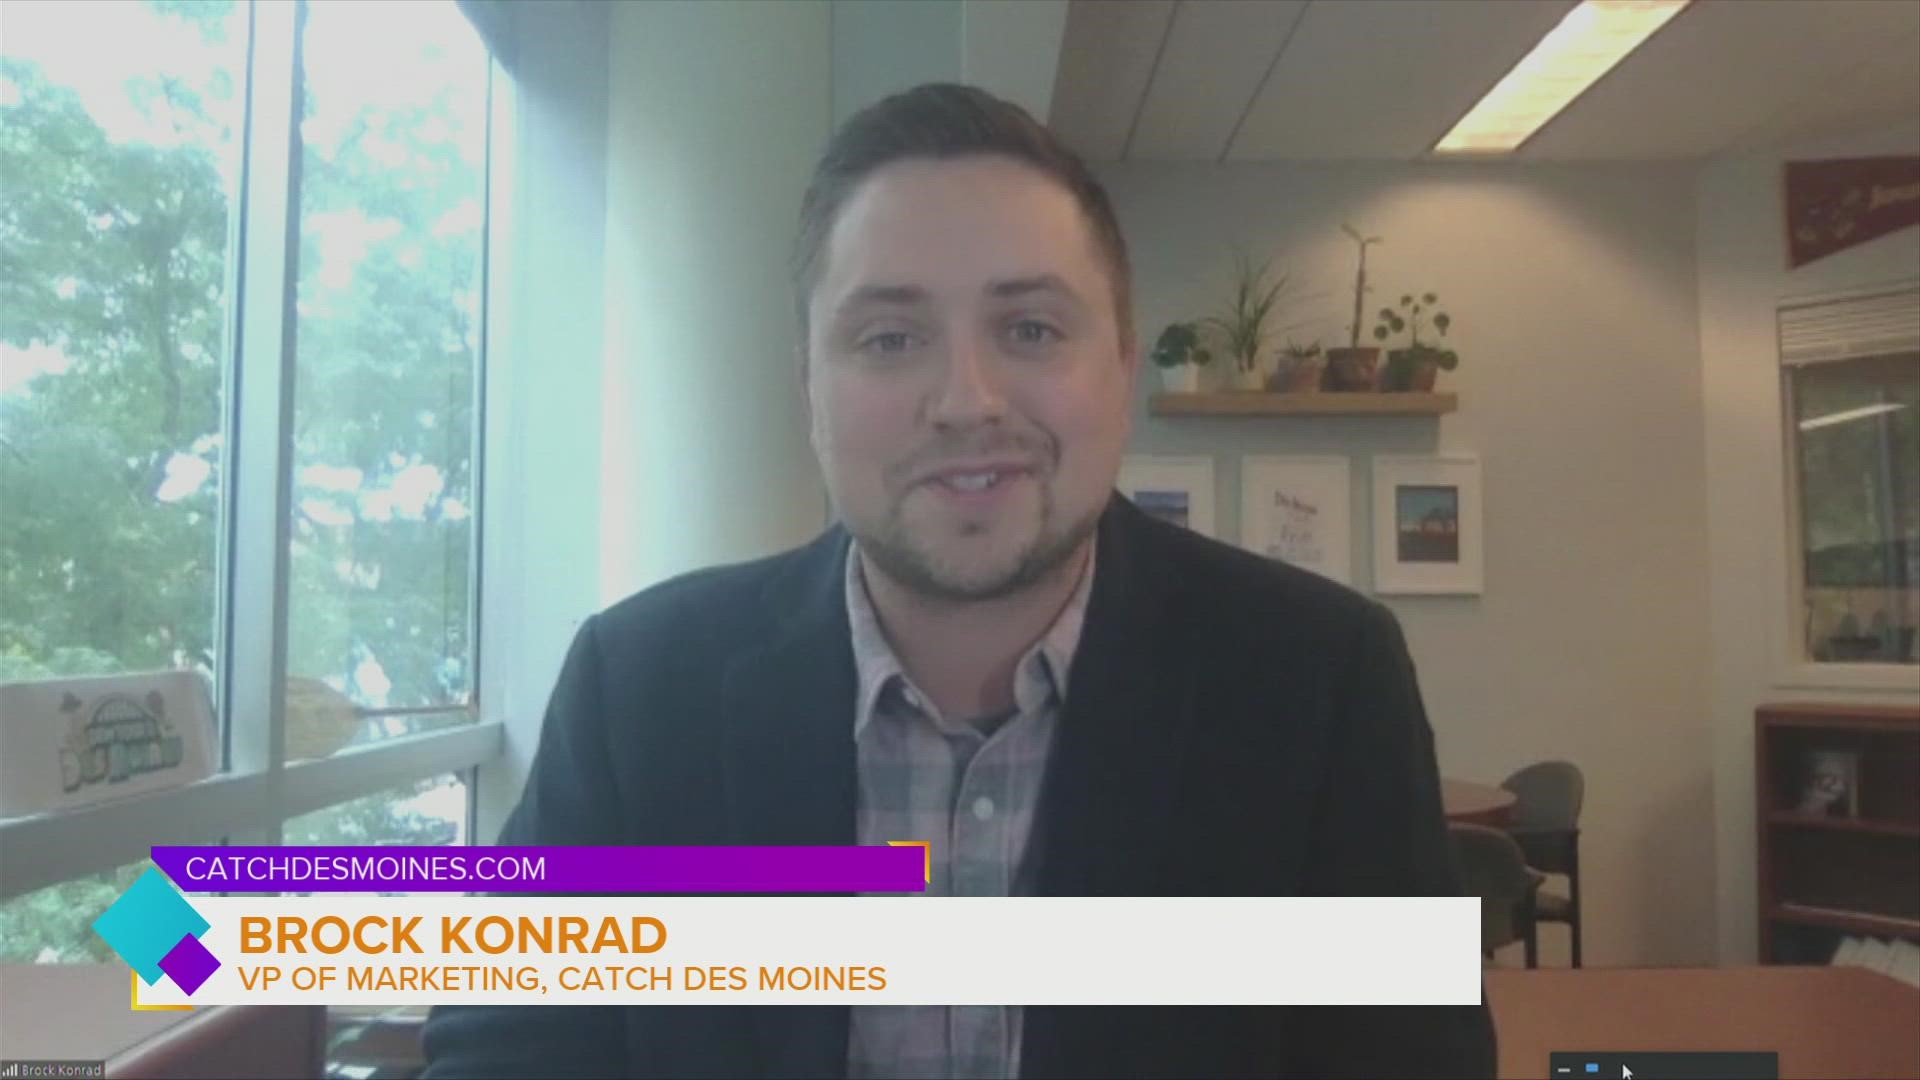 Brock Konrad, VP of Marketing at Catch Des Moines talks about some of the great events in town this week including the DSM Auto Parts Swap Meet at the fairgrounds!